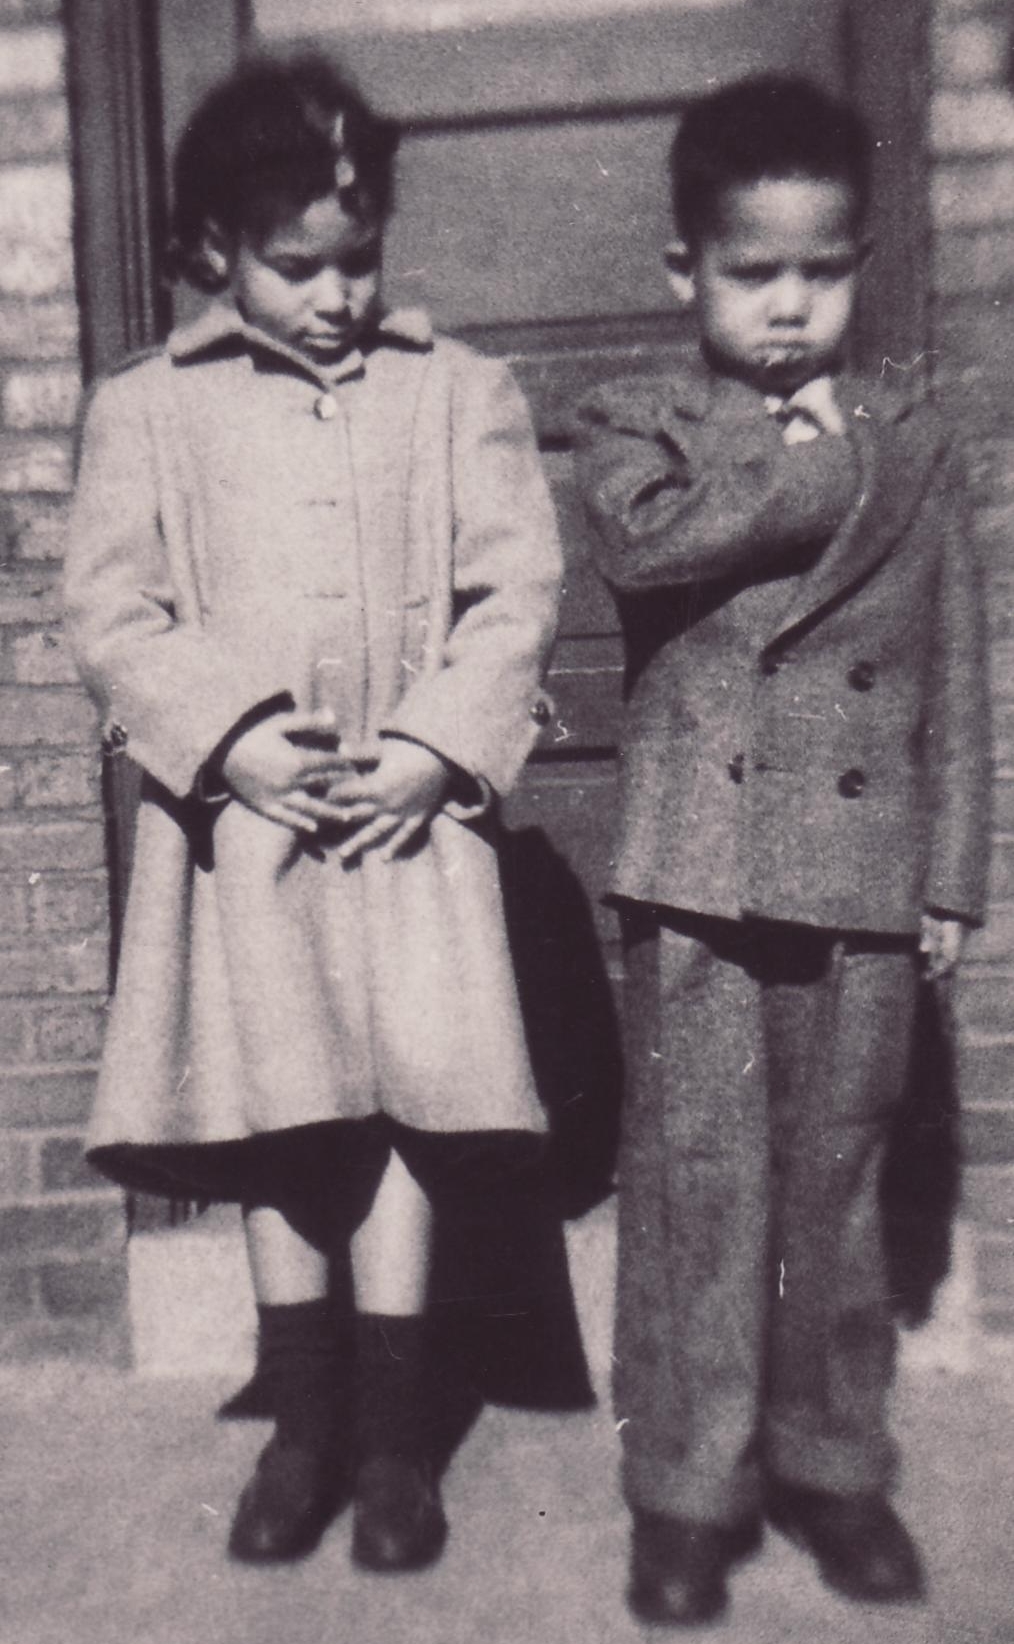 Abdul and his sister, 1940s.